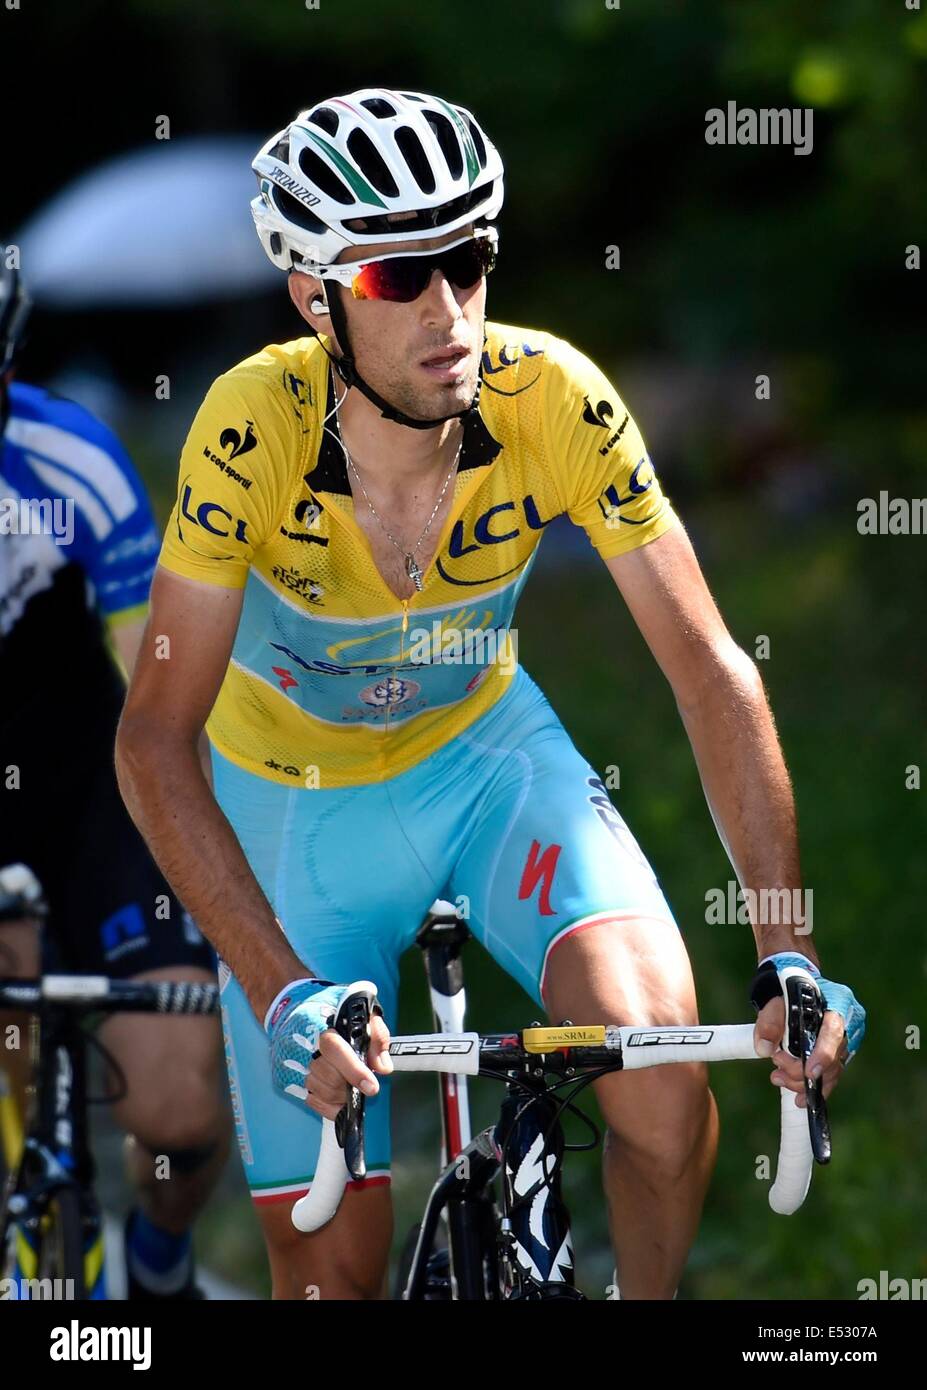 18.07.2014. St Etienne to Chamrousse, France. Tour de France Cycling Tour, stage 13. NIBALI Vincenzo ITA of Astana Pro Team Stock Photo